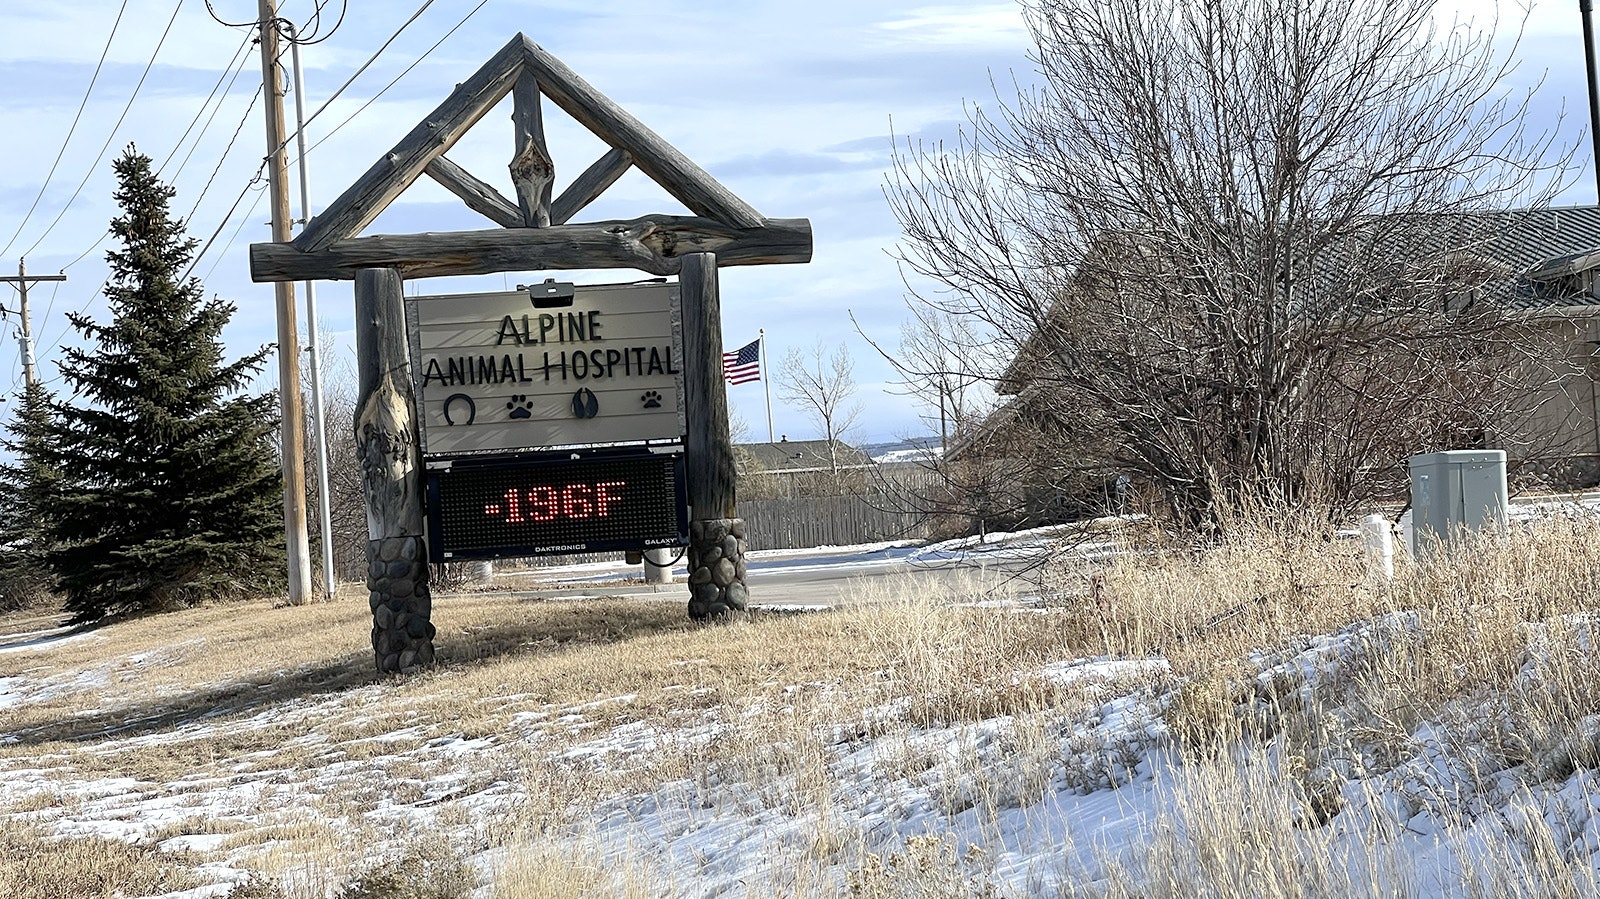 A glitch in the software of this electronic sign at Alpine Animal Hospital in Laramie, Wyoming, shows it's minus 196 degrees there. If true, it would by far be the coldest place ever recorded on the planet.